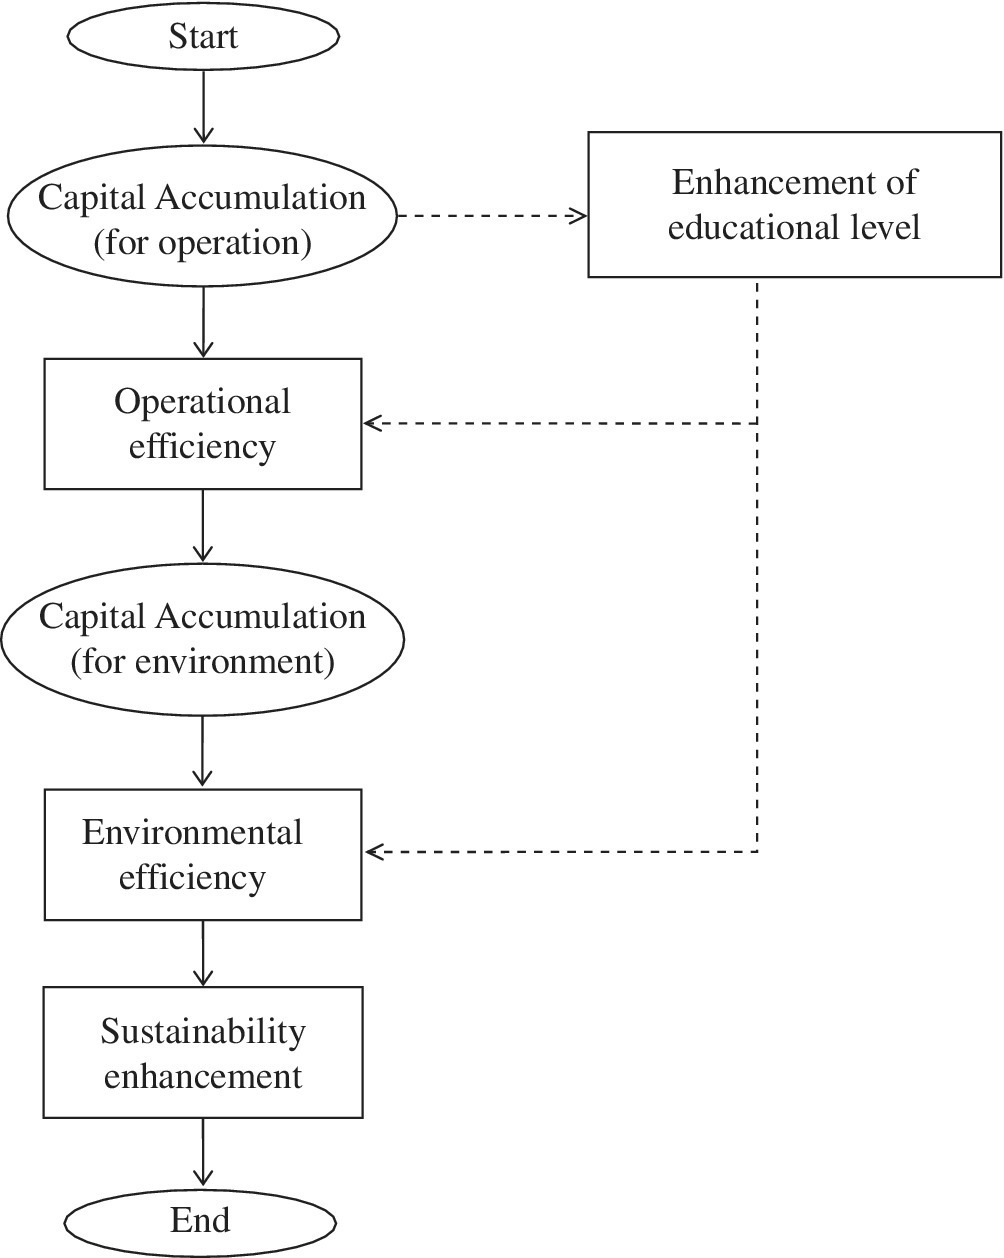 Flowchart depicting a process for sustainability enhancement from start branching to capital accumulation to operational efficiency to capital accumulation to end.